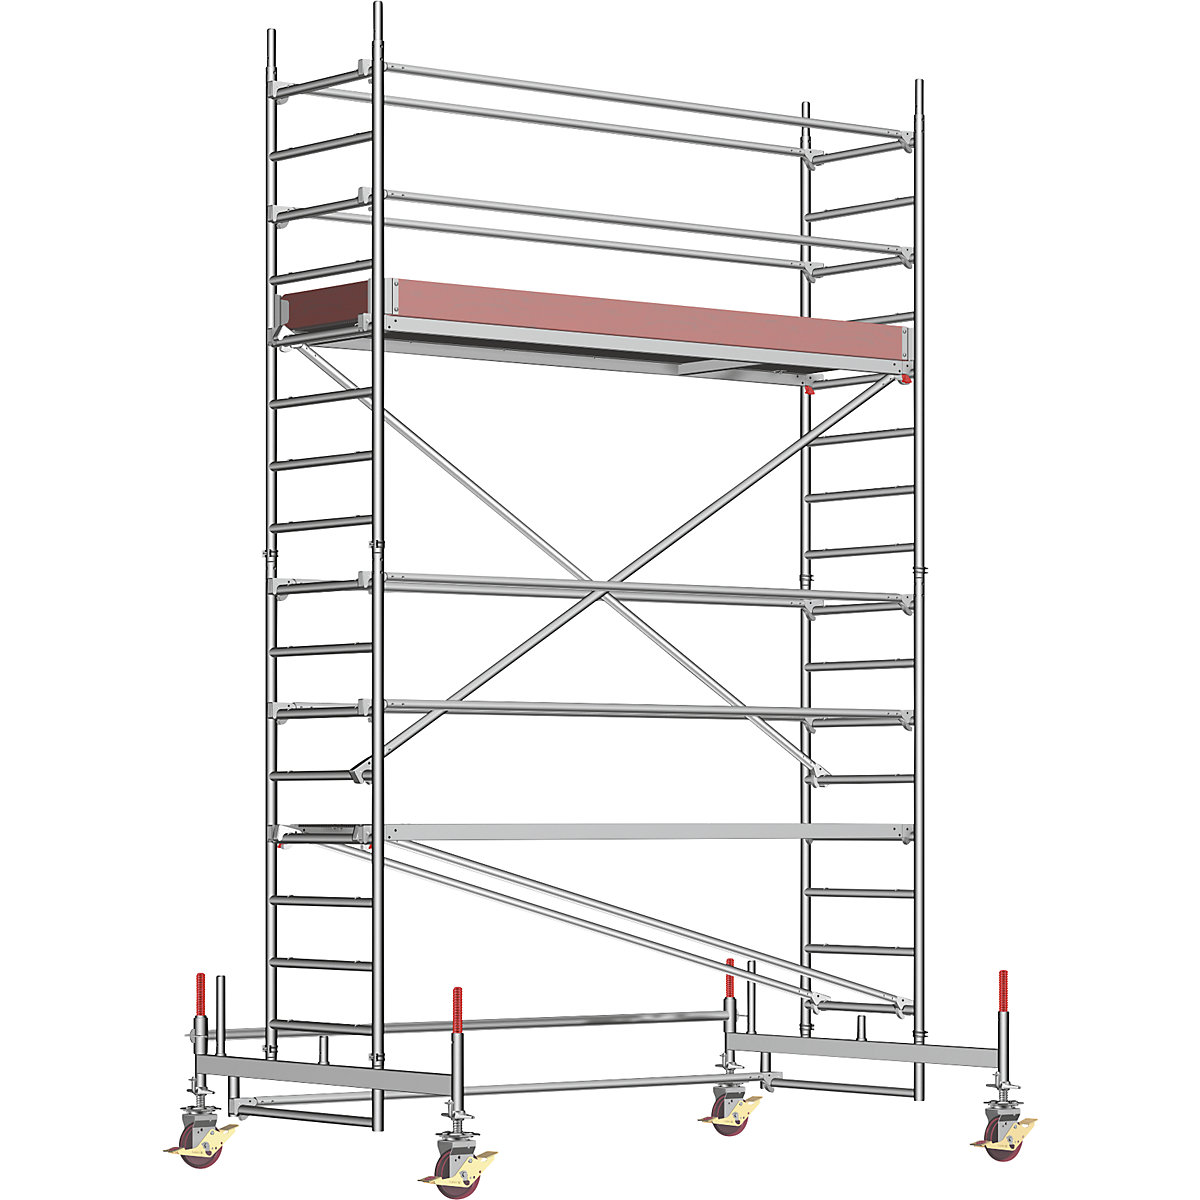 Universal mobile access tower – Layher, standard model, scaffolding height 4.58 m-4